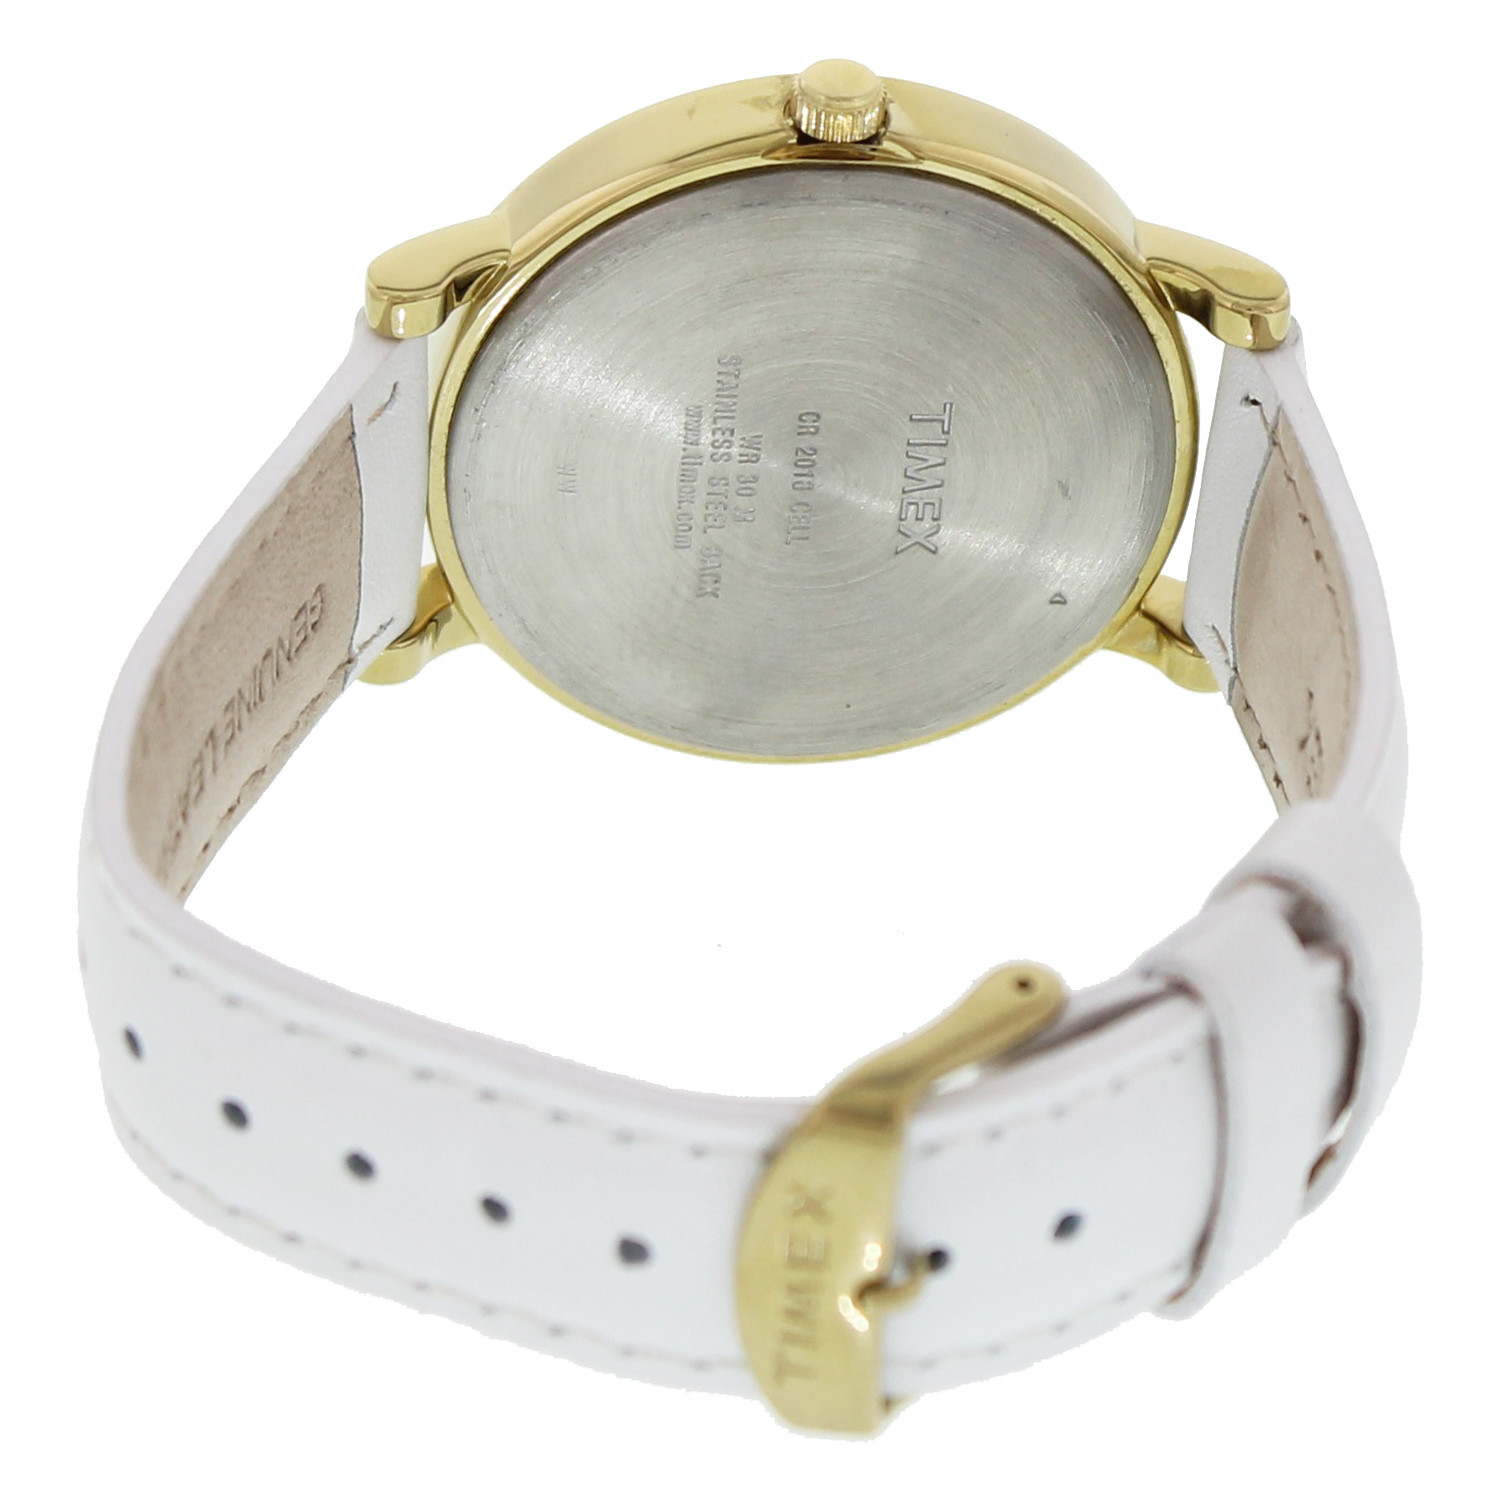 Leather Unisex Watch T2P170 - image 3 of 3